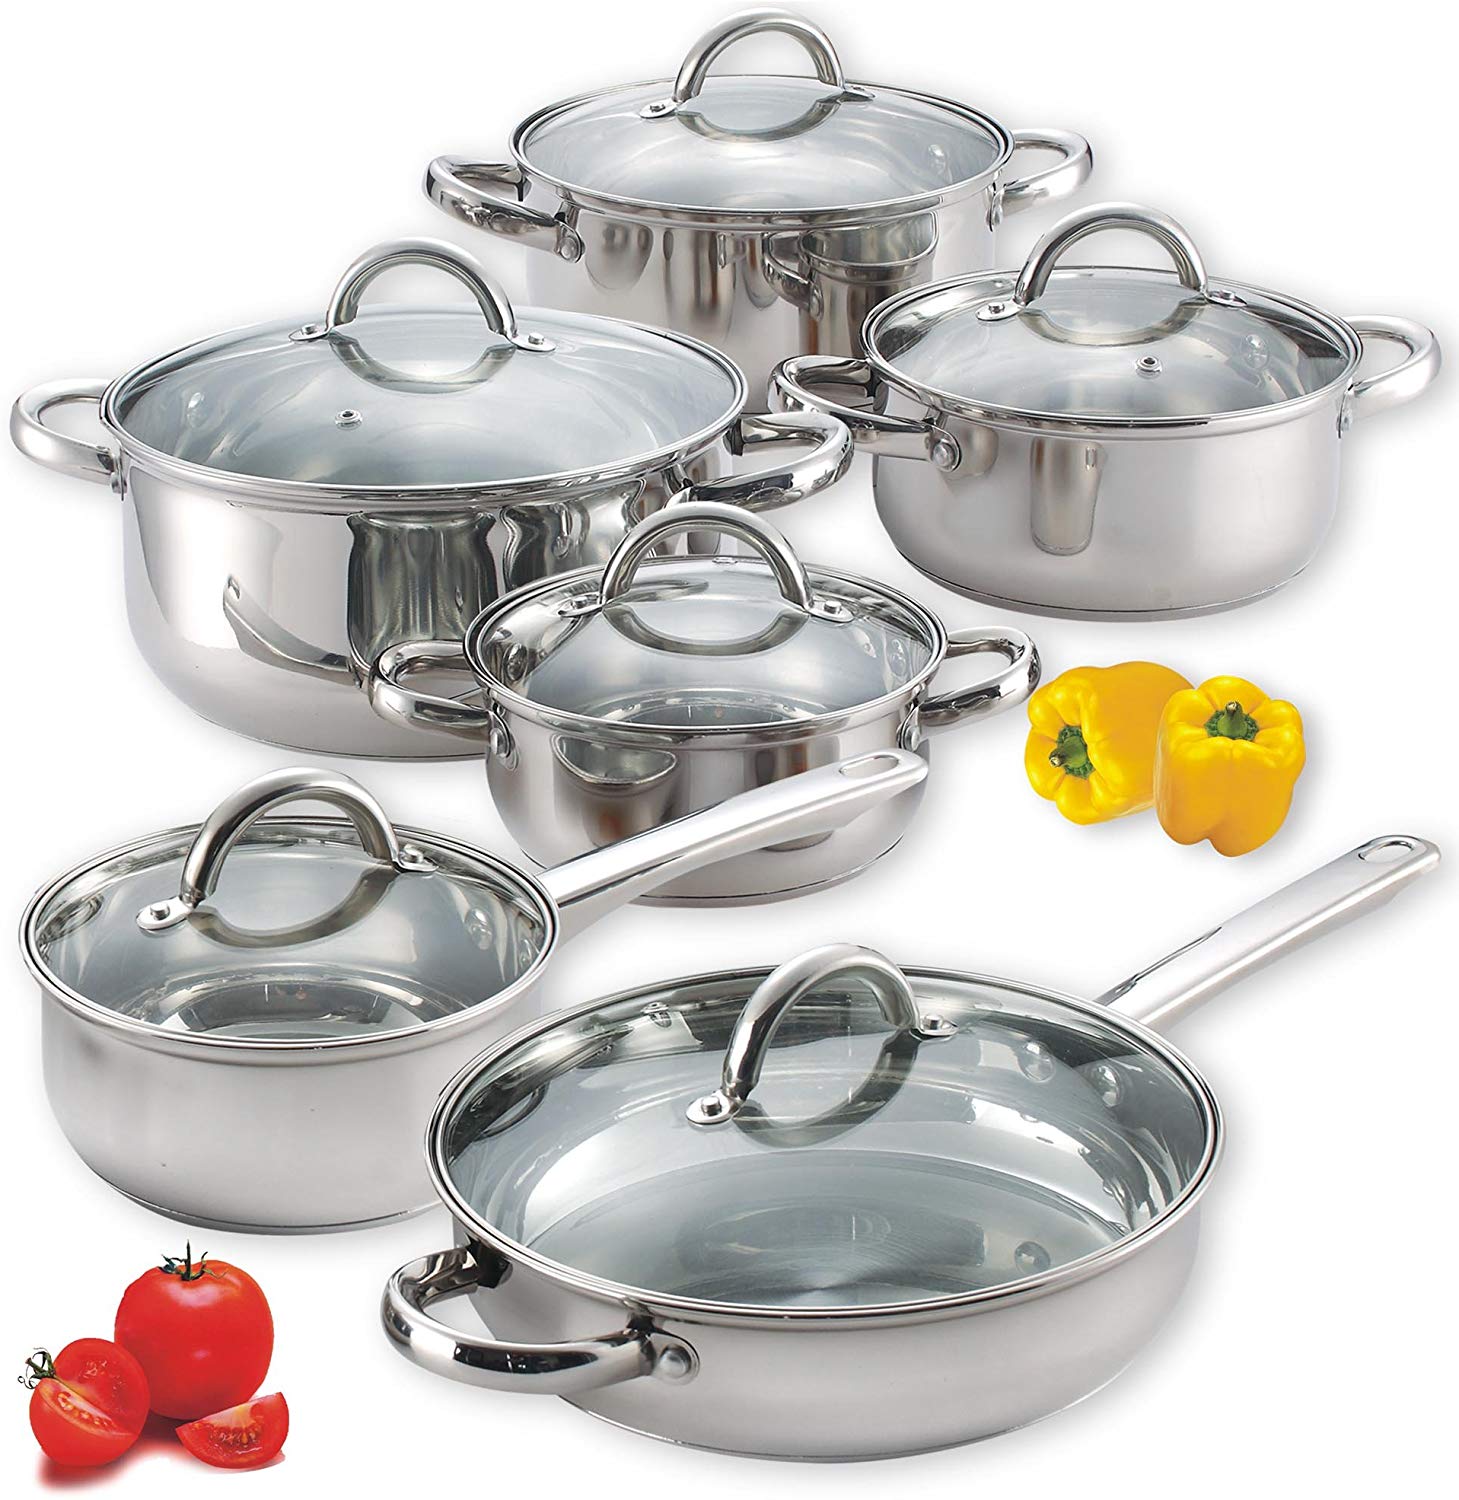 Cook N Home Stainless Cookware Set, 12-Piece